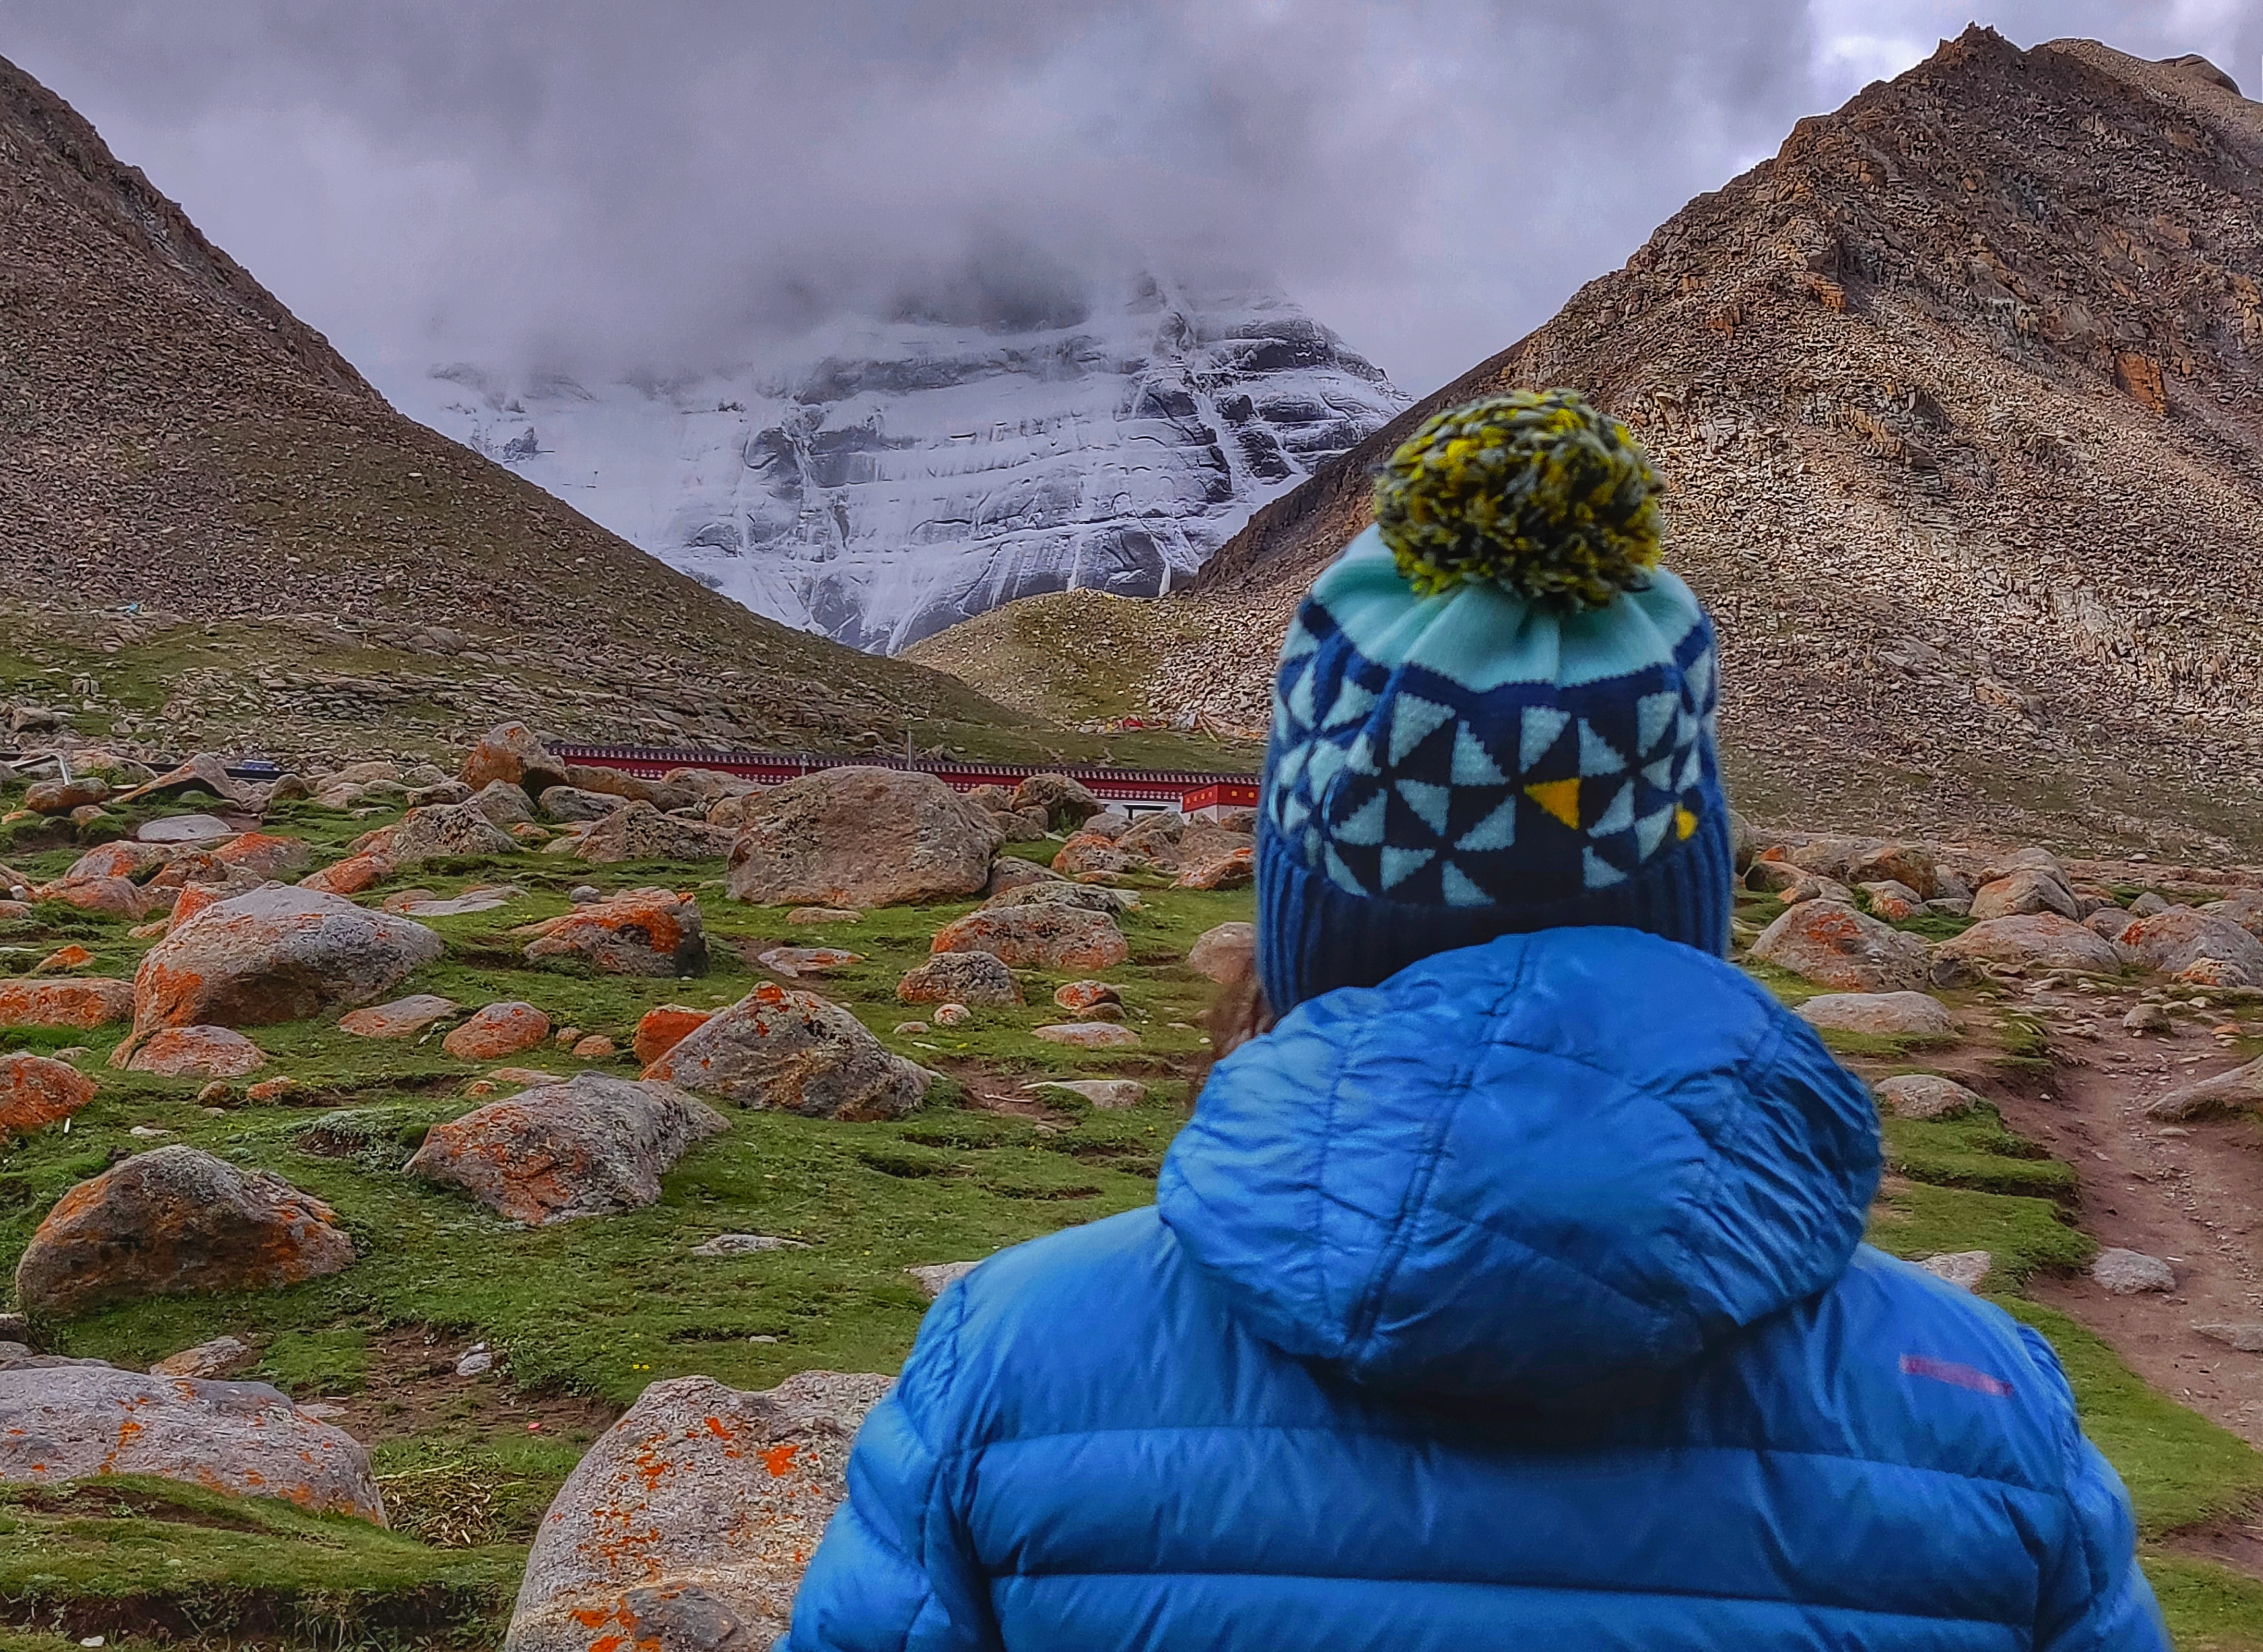 My moment with Mount Kailash